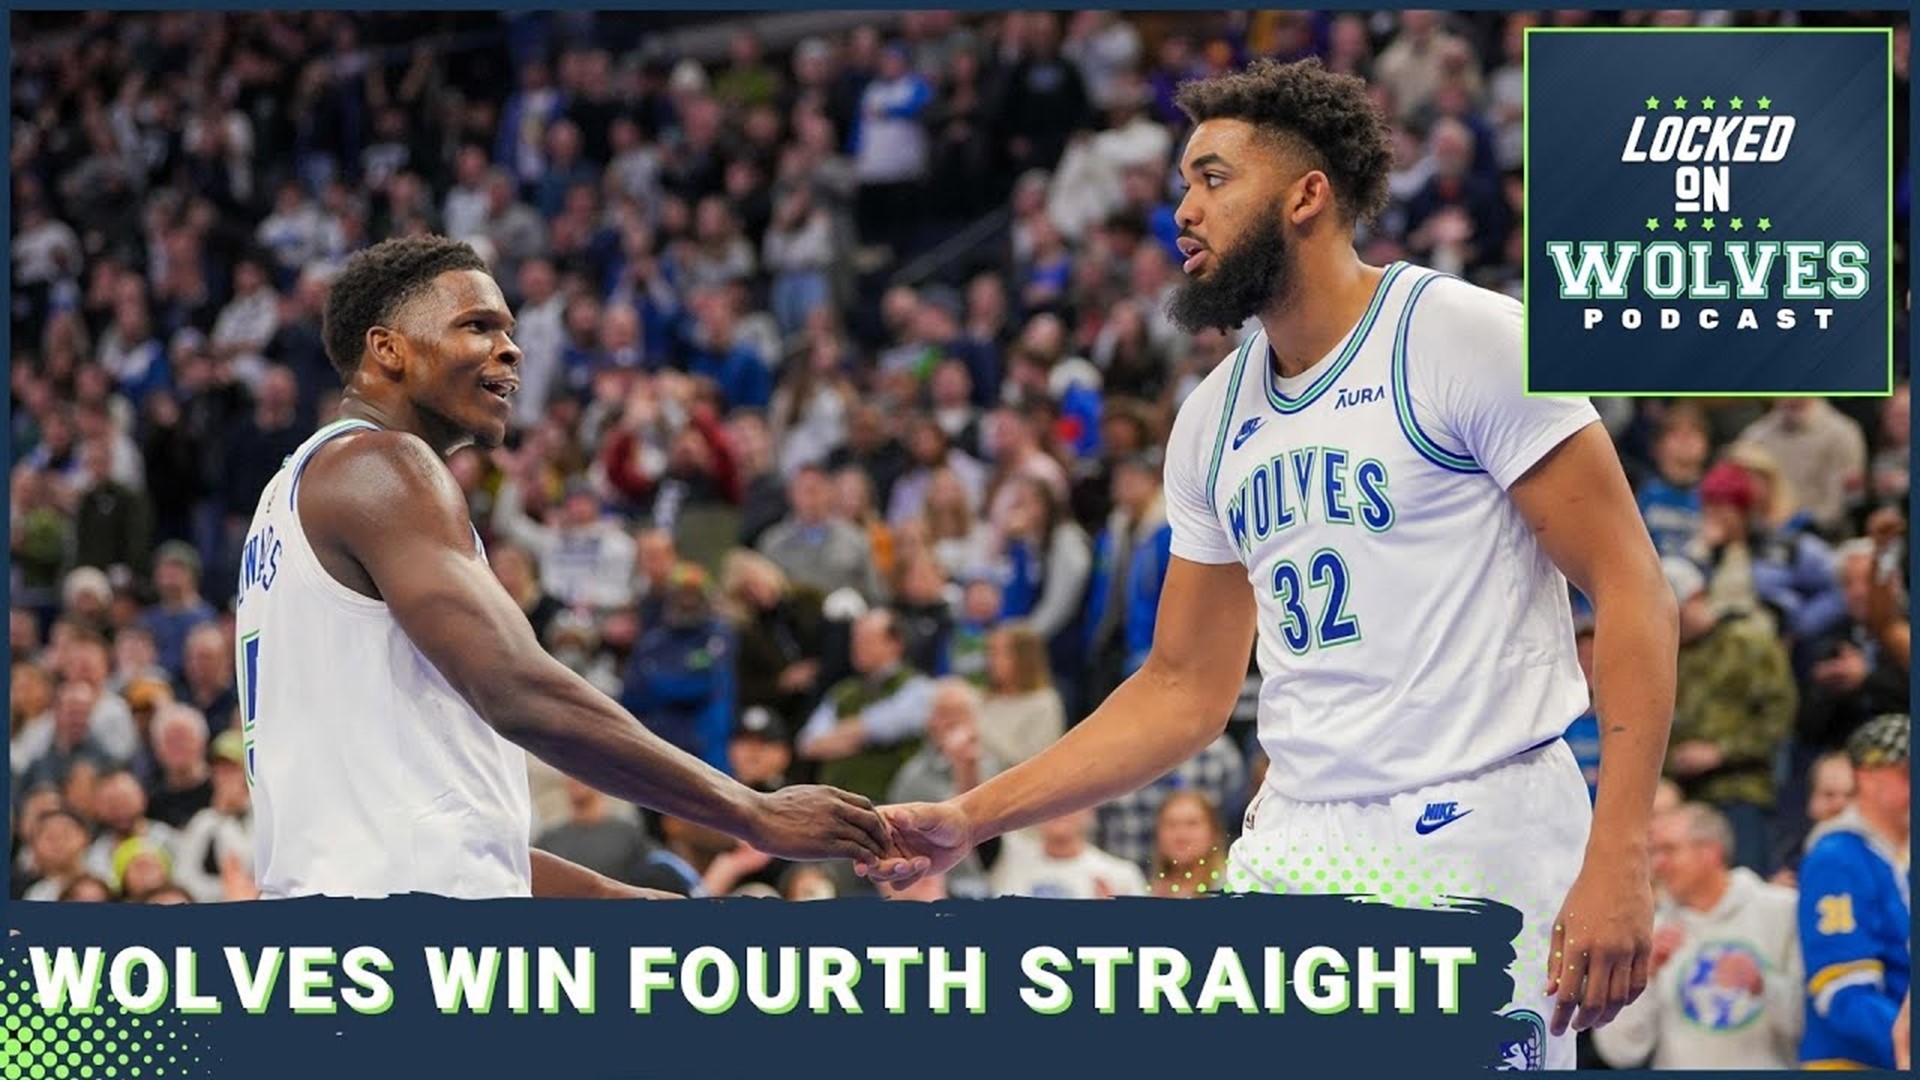 Strong fourth quarter propels the Minnesota Timberwolves to fourth consecutive victory